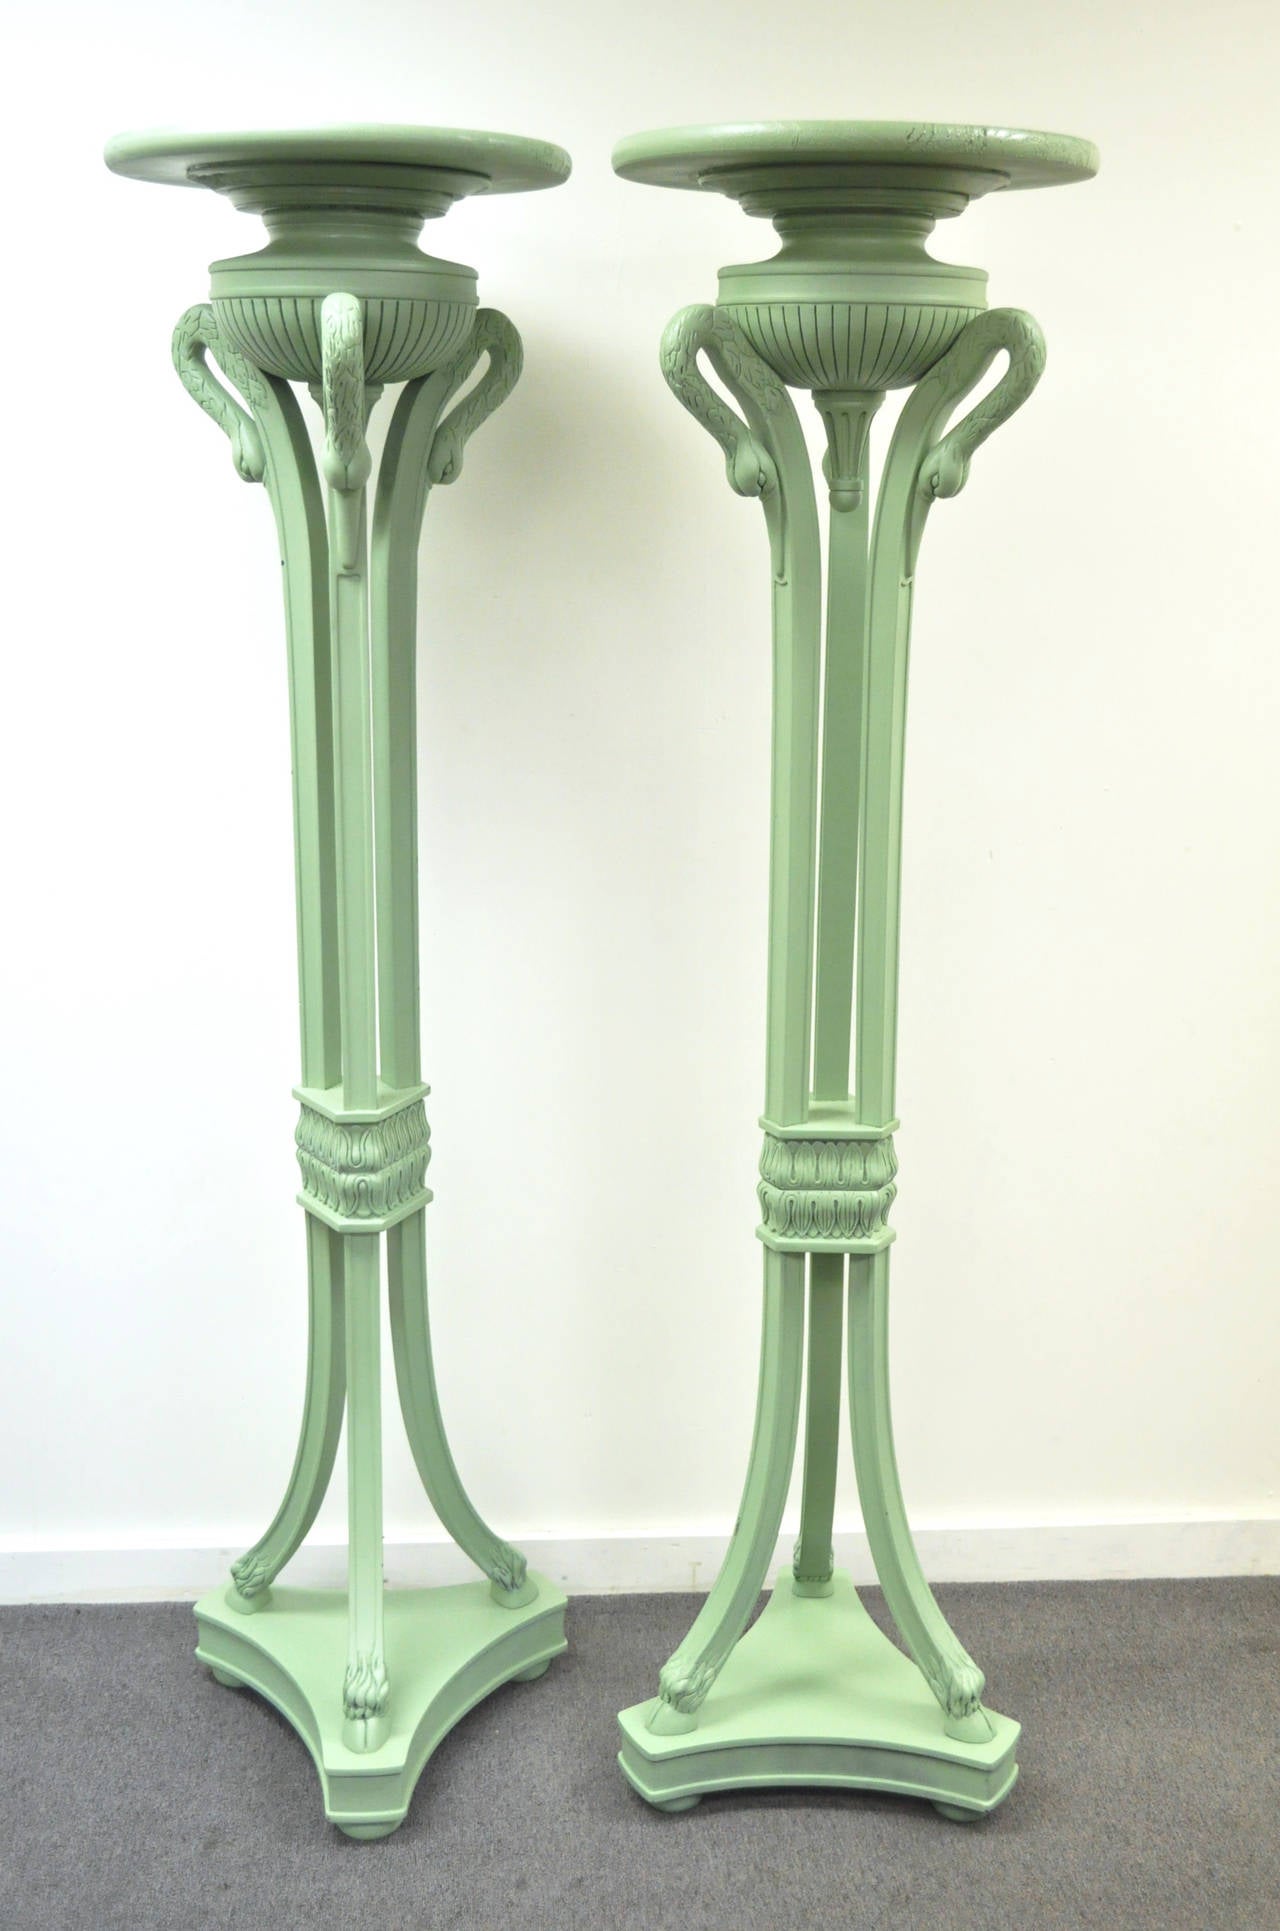 Pair of Neoclassical Style Green Carved Wood Swans Figural Pedestal Plant Stands 3